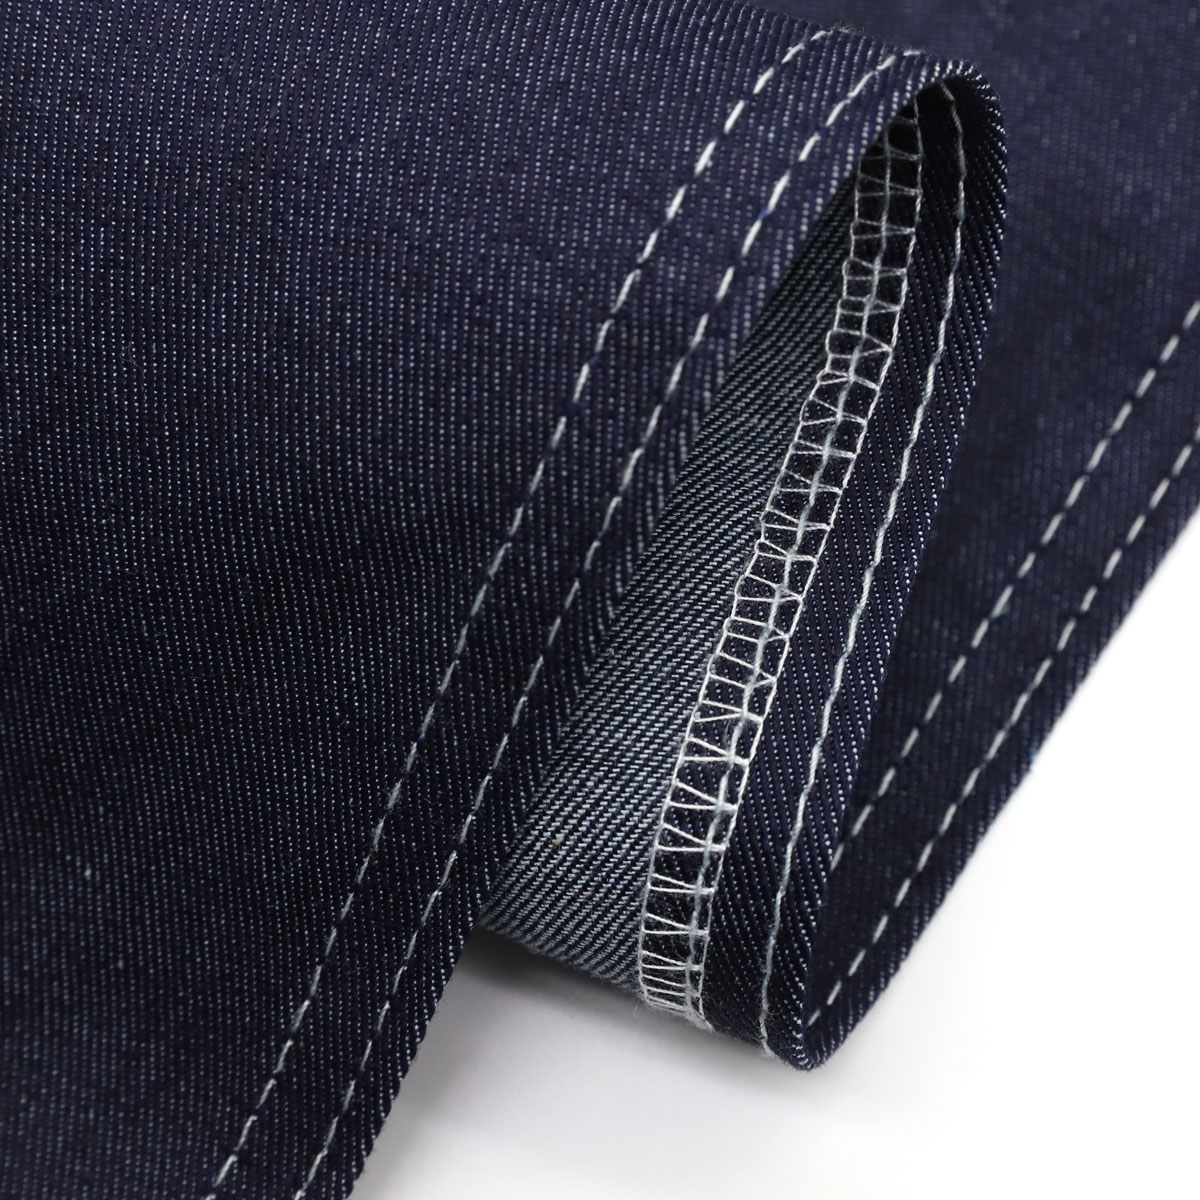 Tips to Clean Stainless Stretch Denim Jean Fabric 1